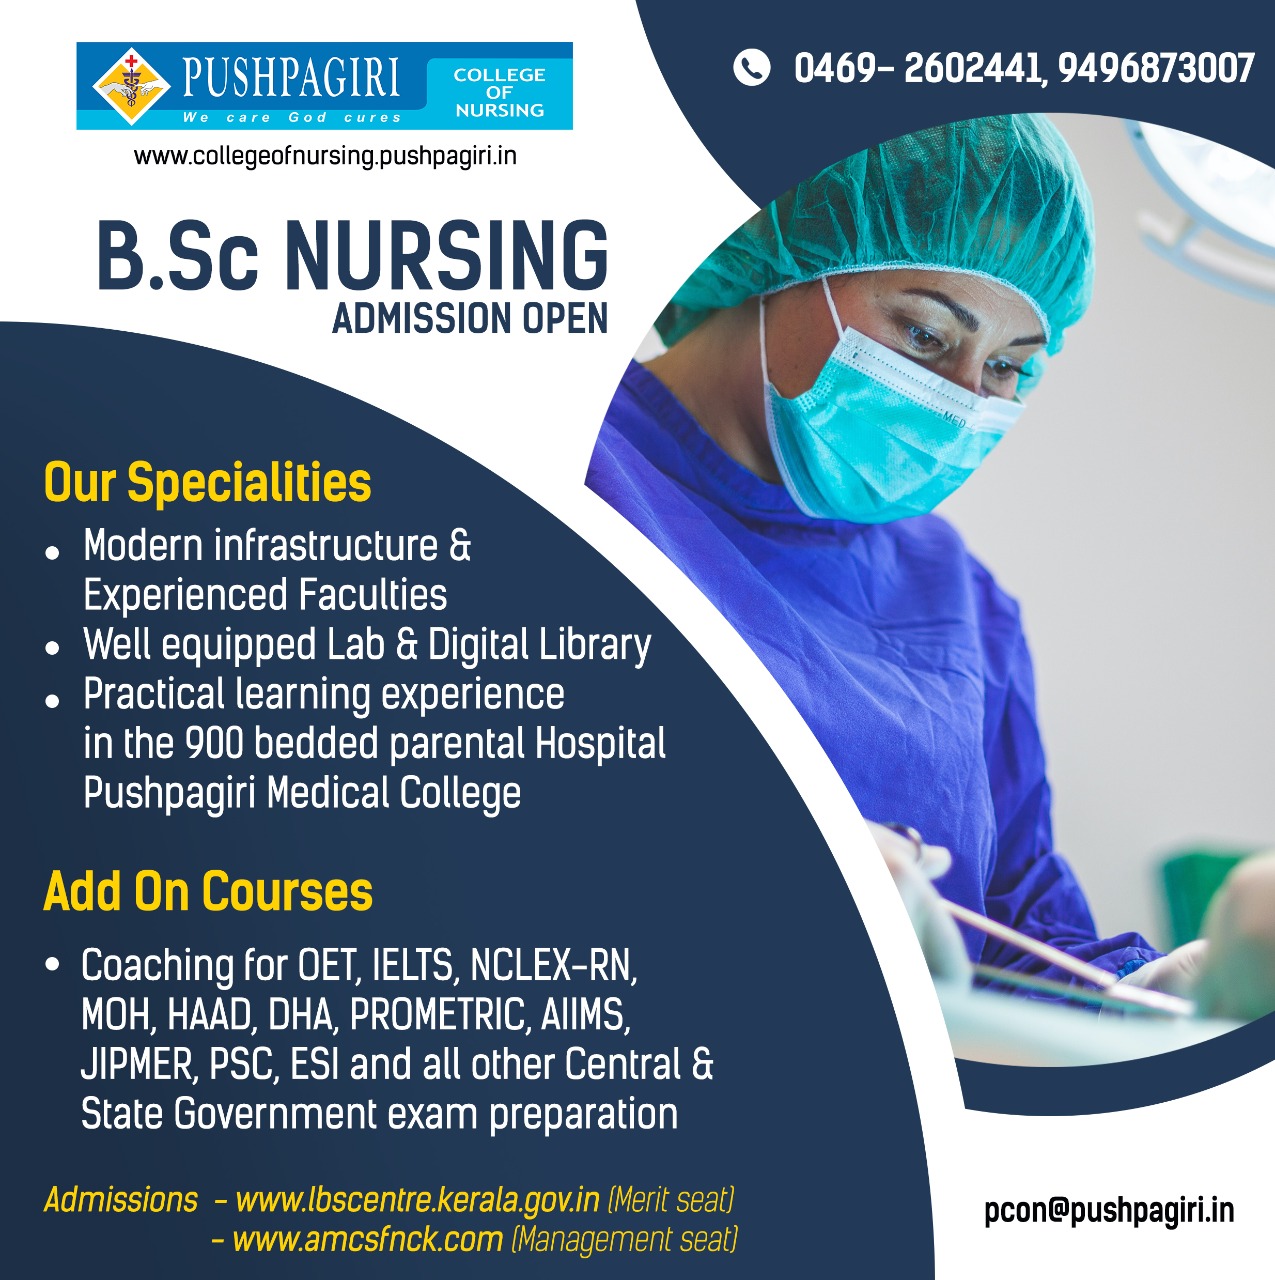 BSc Nursing Admissions 2020 Open